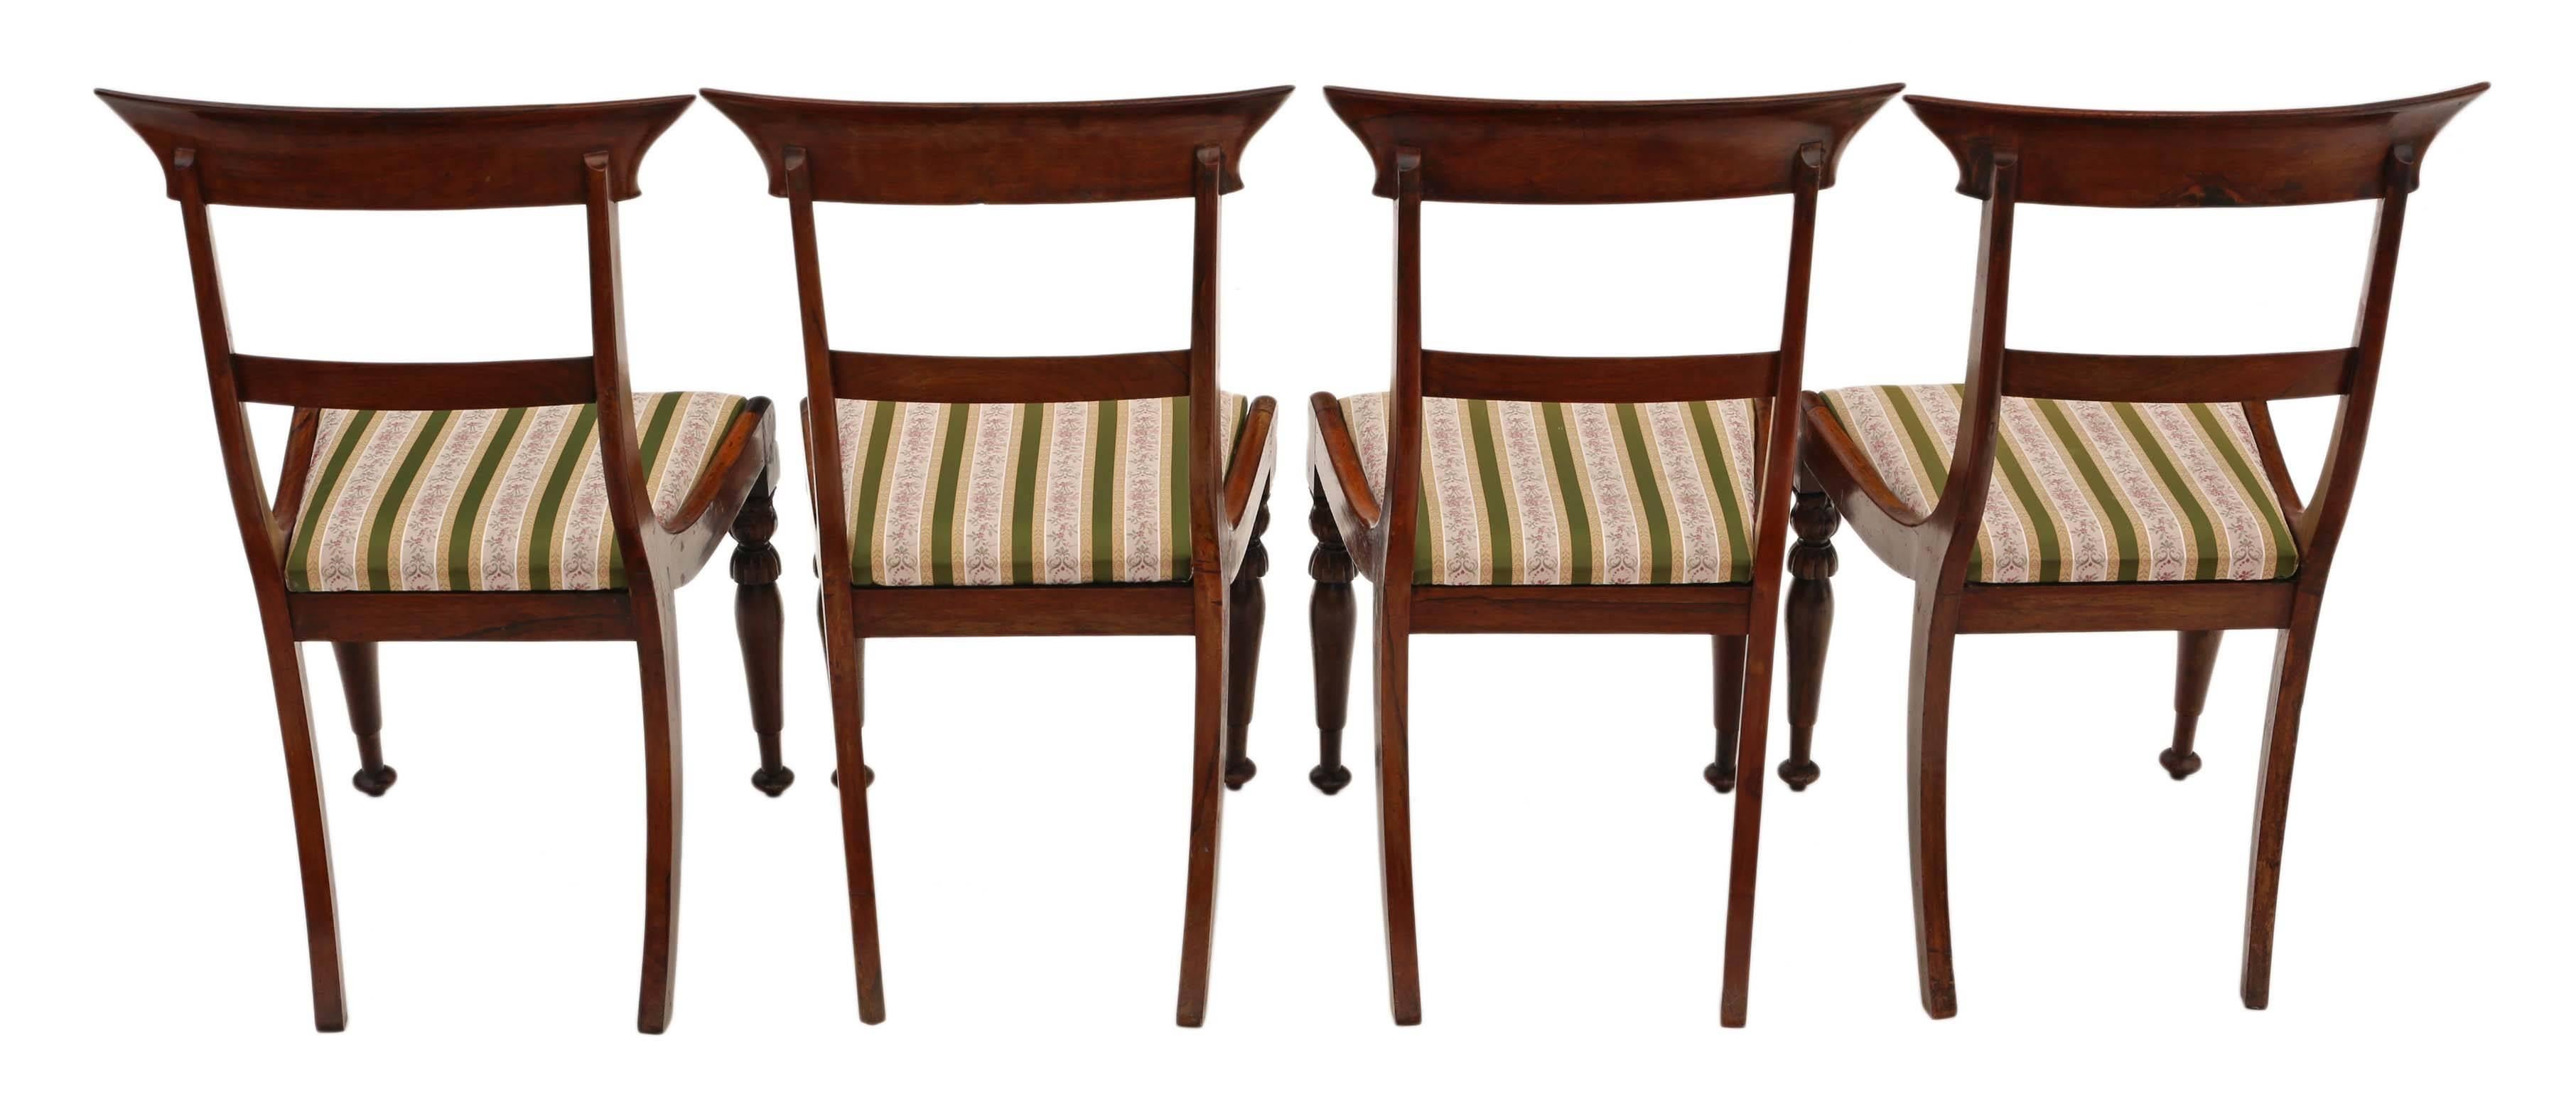 Antique set of four Regency, circa 1825 rosewood dining chairs.

Fantastic age, color and patina. Beautiful front legs and backs.

Solid and strong with no loose joints.

The upholstery is not new, but has only light wear and no major